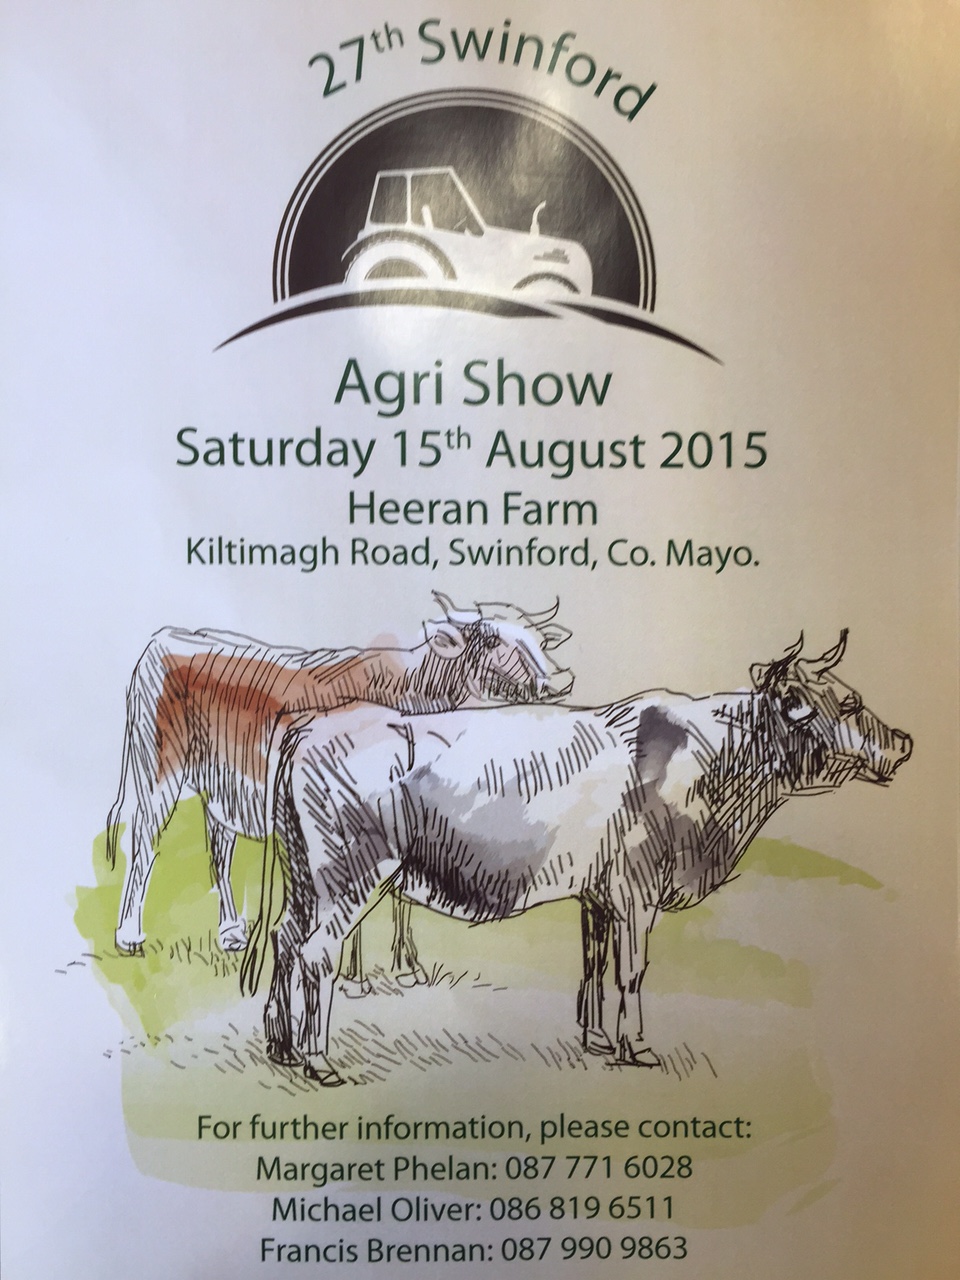 The 27th Annual Swinford Show will be held on Saturday 15th August 2015 in a wonderful new 30-acre venue on the Kiltimagh Road, just off the N5, by kind permission of the Heeran family. Visit Swinford.ie for more details.